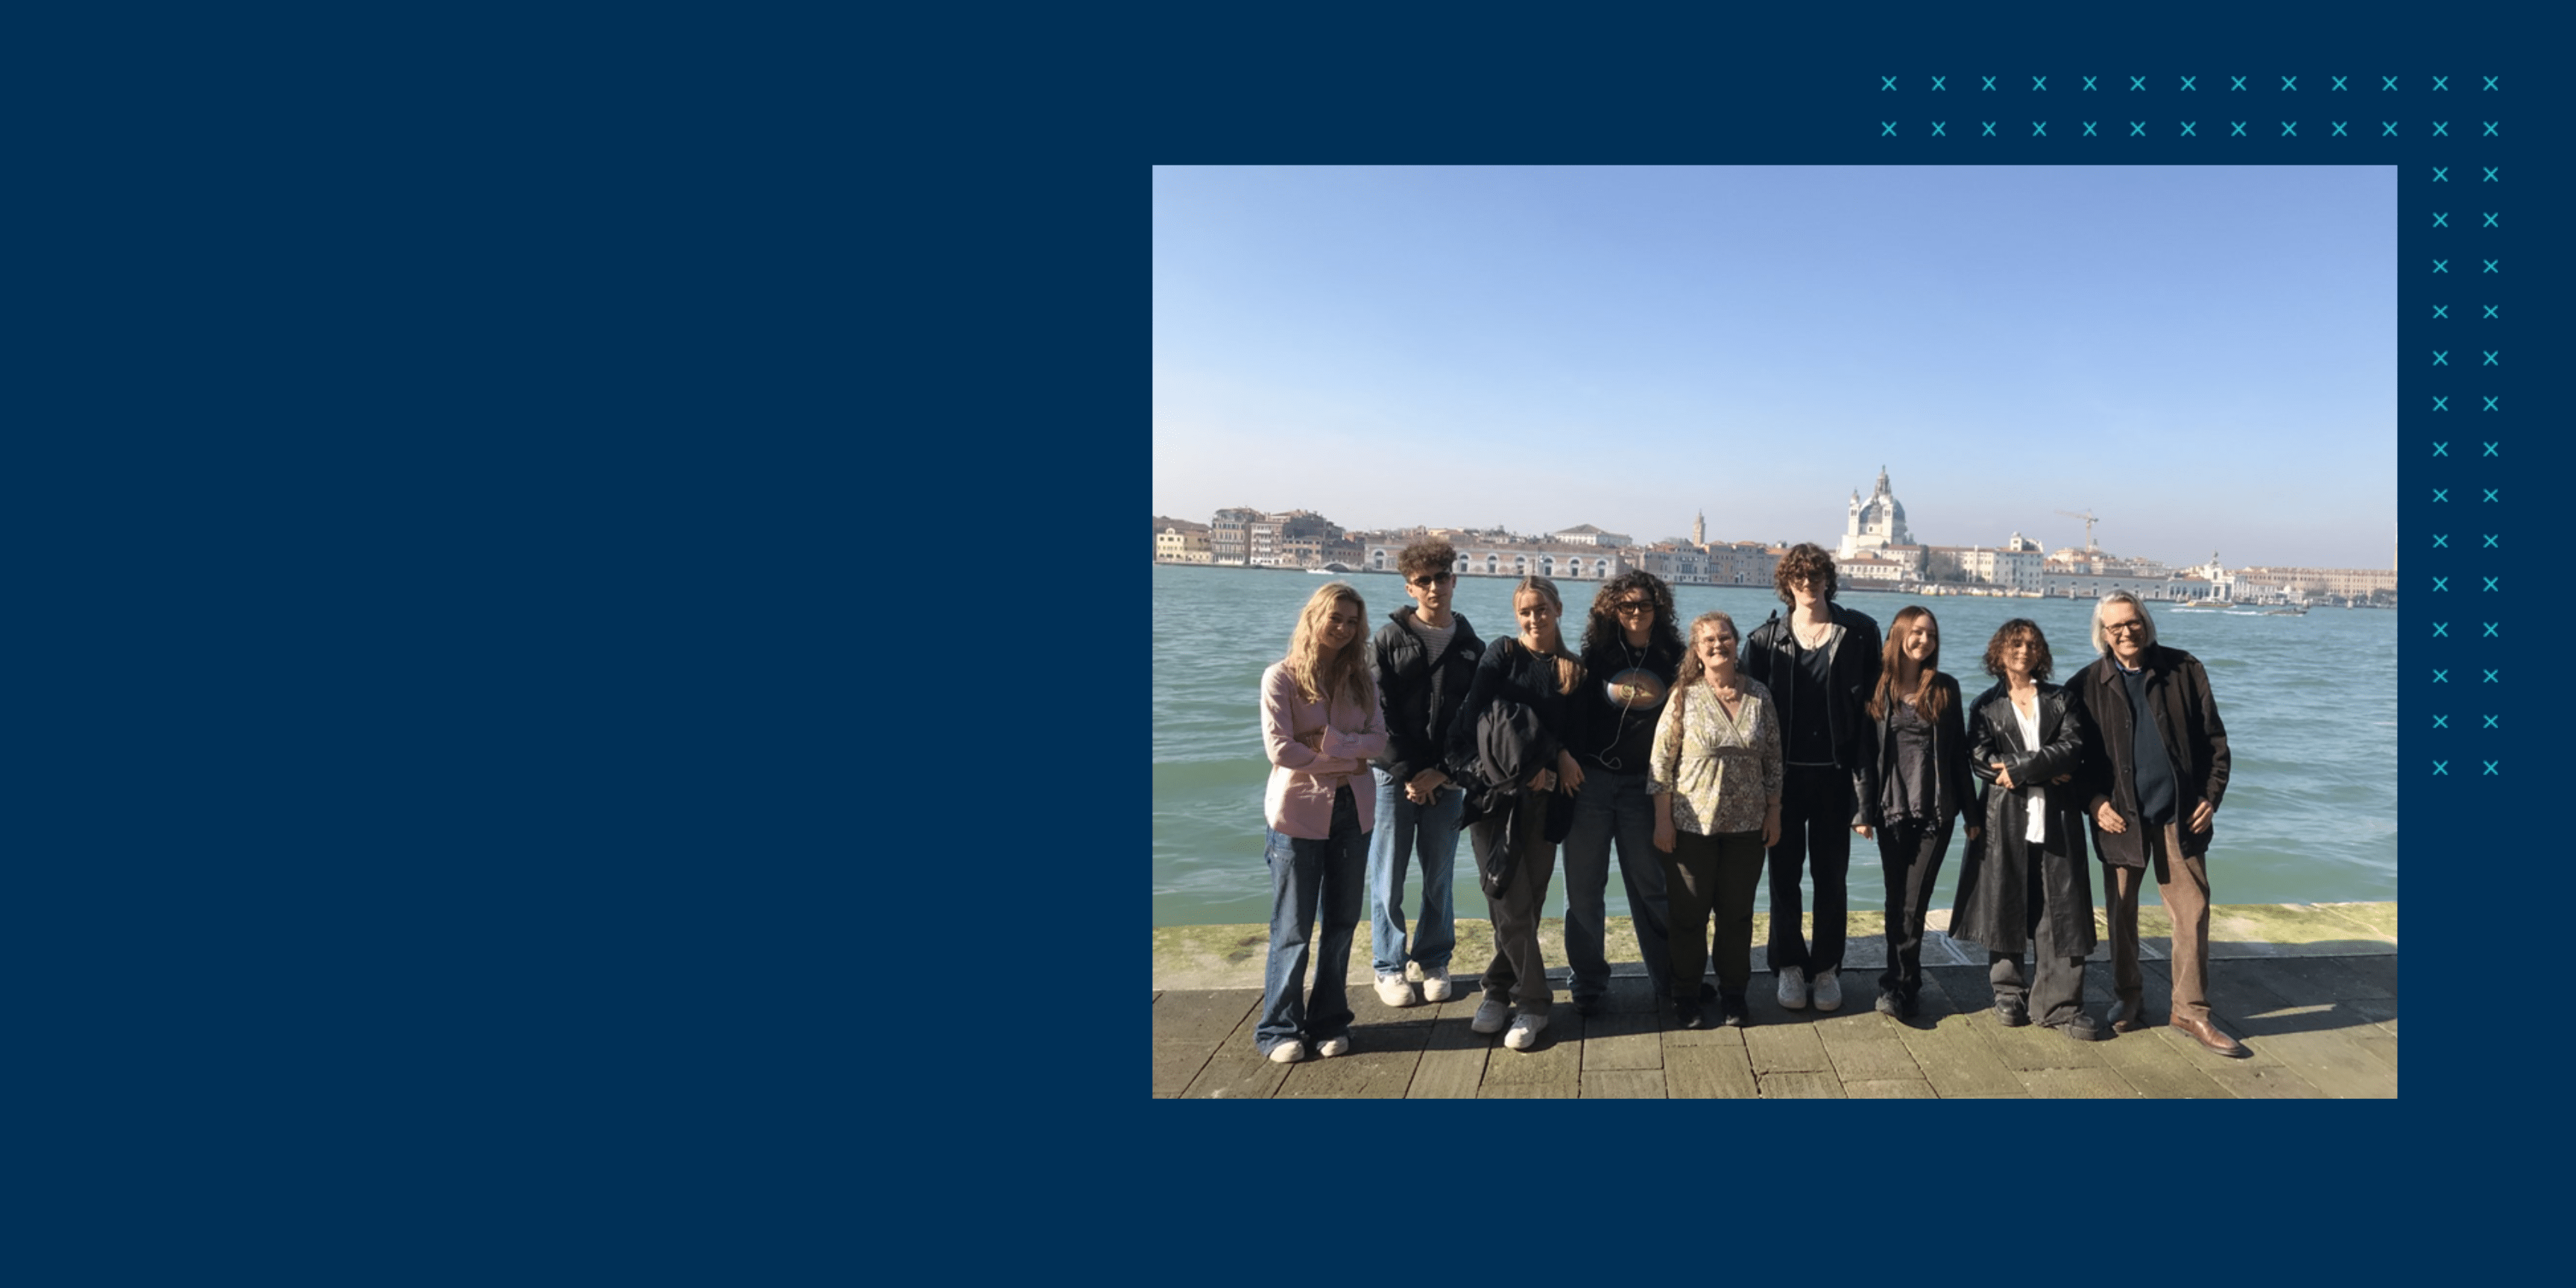 d'Overbroeck's History of Art students enjoy fascinating trip to Venice-history-of-art-trip-venice-wordpress-banner-venice-history-of-art-trip-2